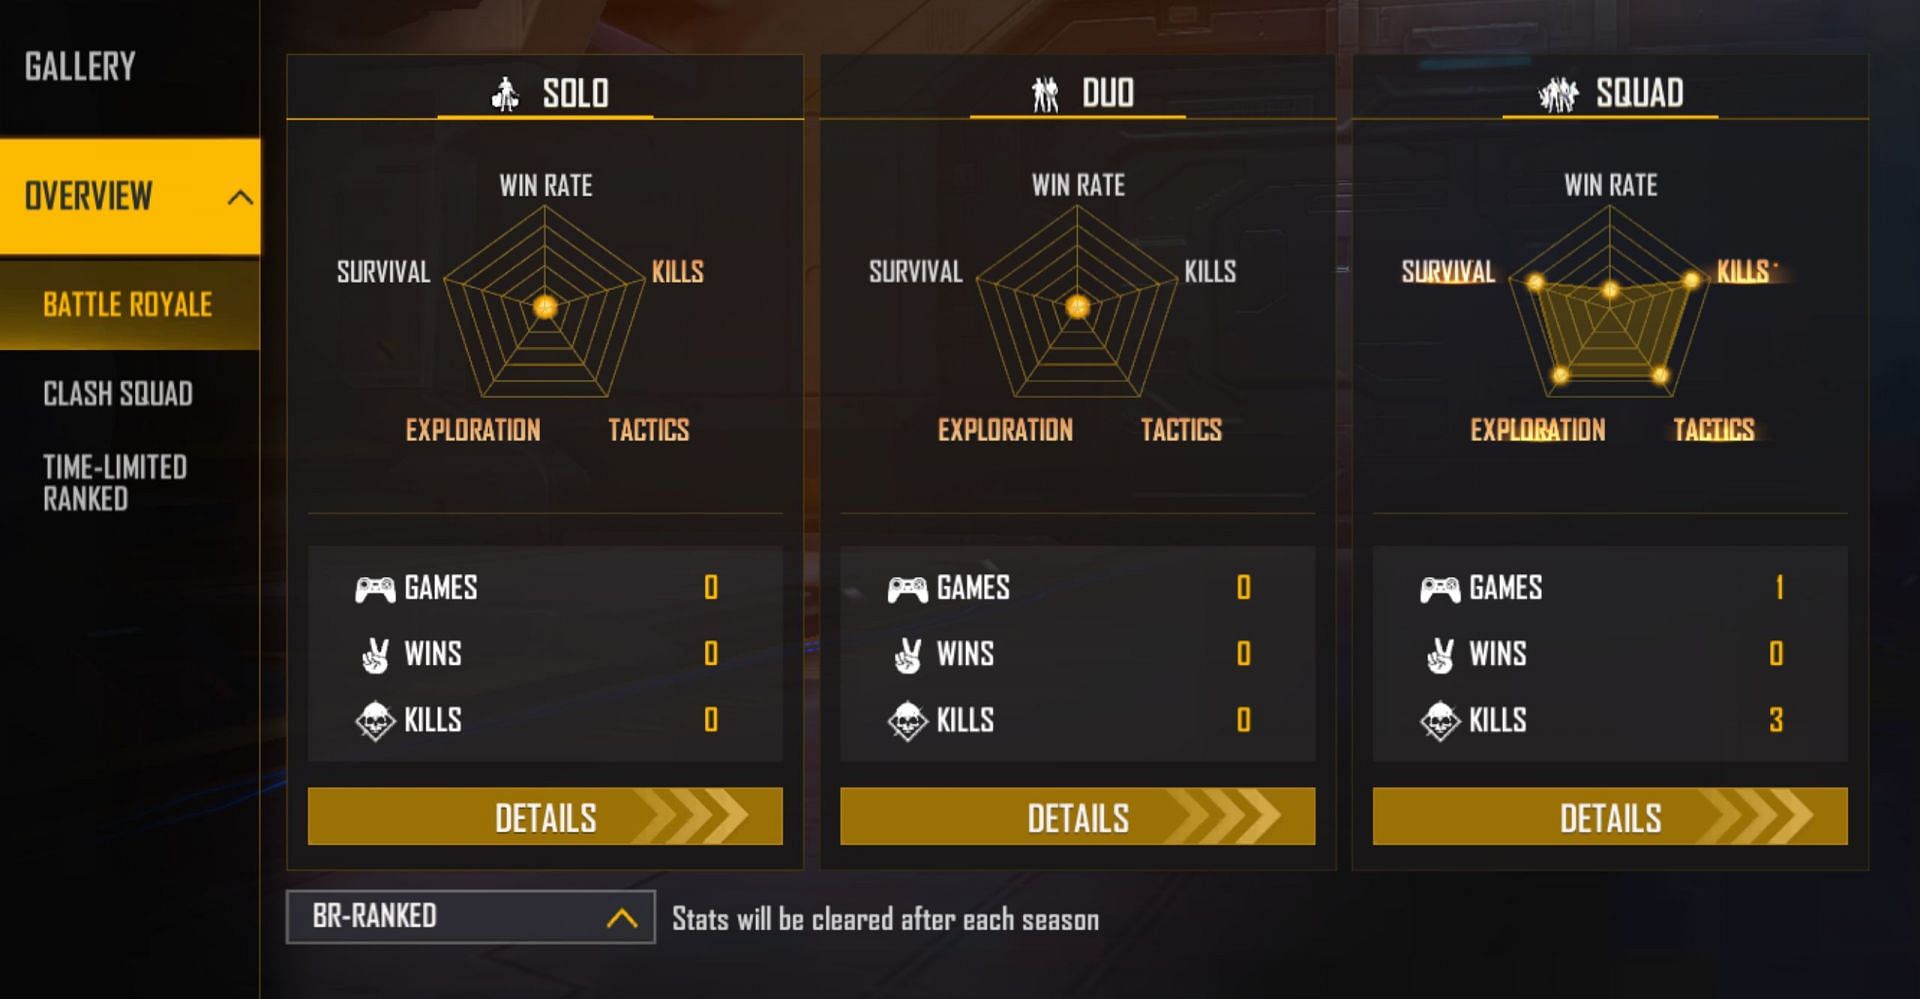 He has played only one ranked match in the current season (Image via Free Fire)